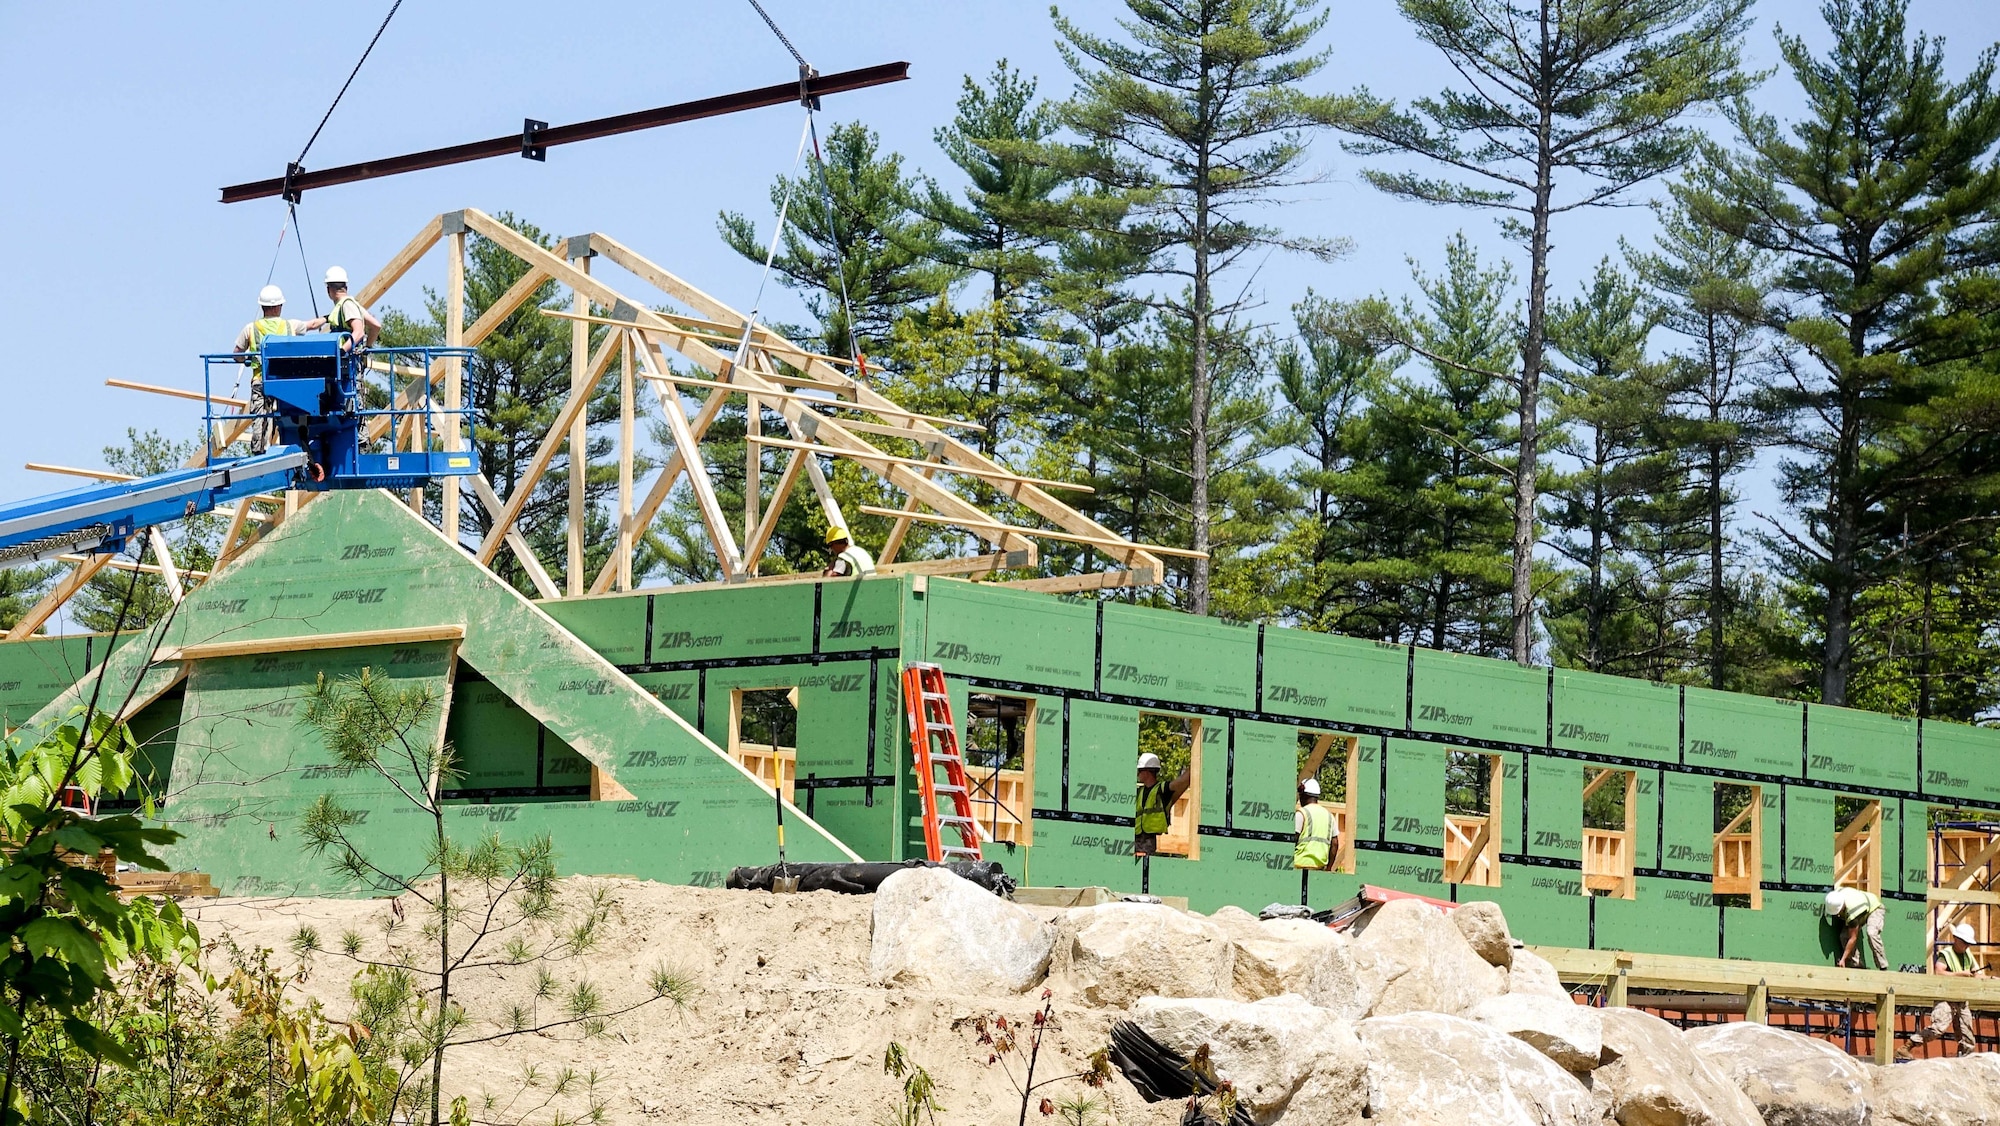 U.S. Airmen with the 139th Civil Engineer Squadron, Missouri Air National Guard, participate in Innovative Readiness Training (IRT), at William Hinds Boy Scout Camp in Raymond, Maine, on May 25, 2016. The IRT is part of a joint operation with the U.S. Marines, Navy, Air National Guard, and Air Force Reserve to help rebuild parts of the camp. (U.S. Air National Guard photo by Master Sgt. Shannon Bond/Released)